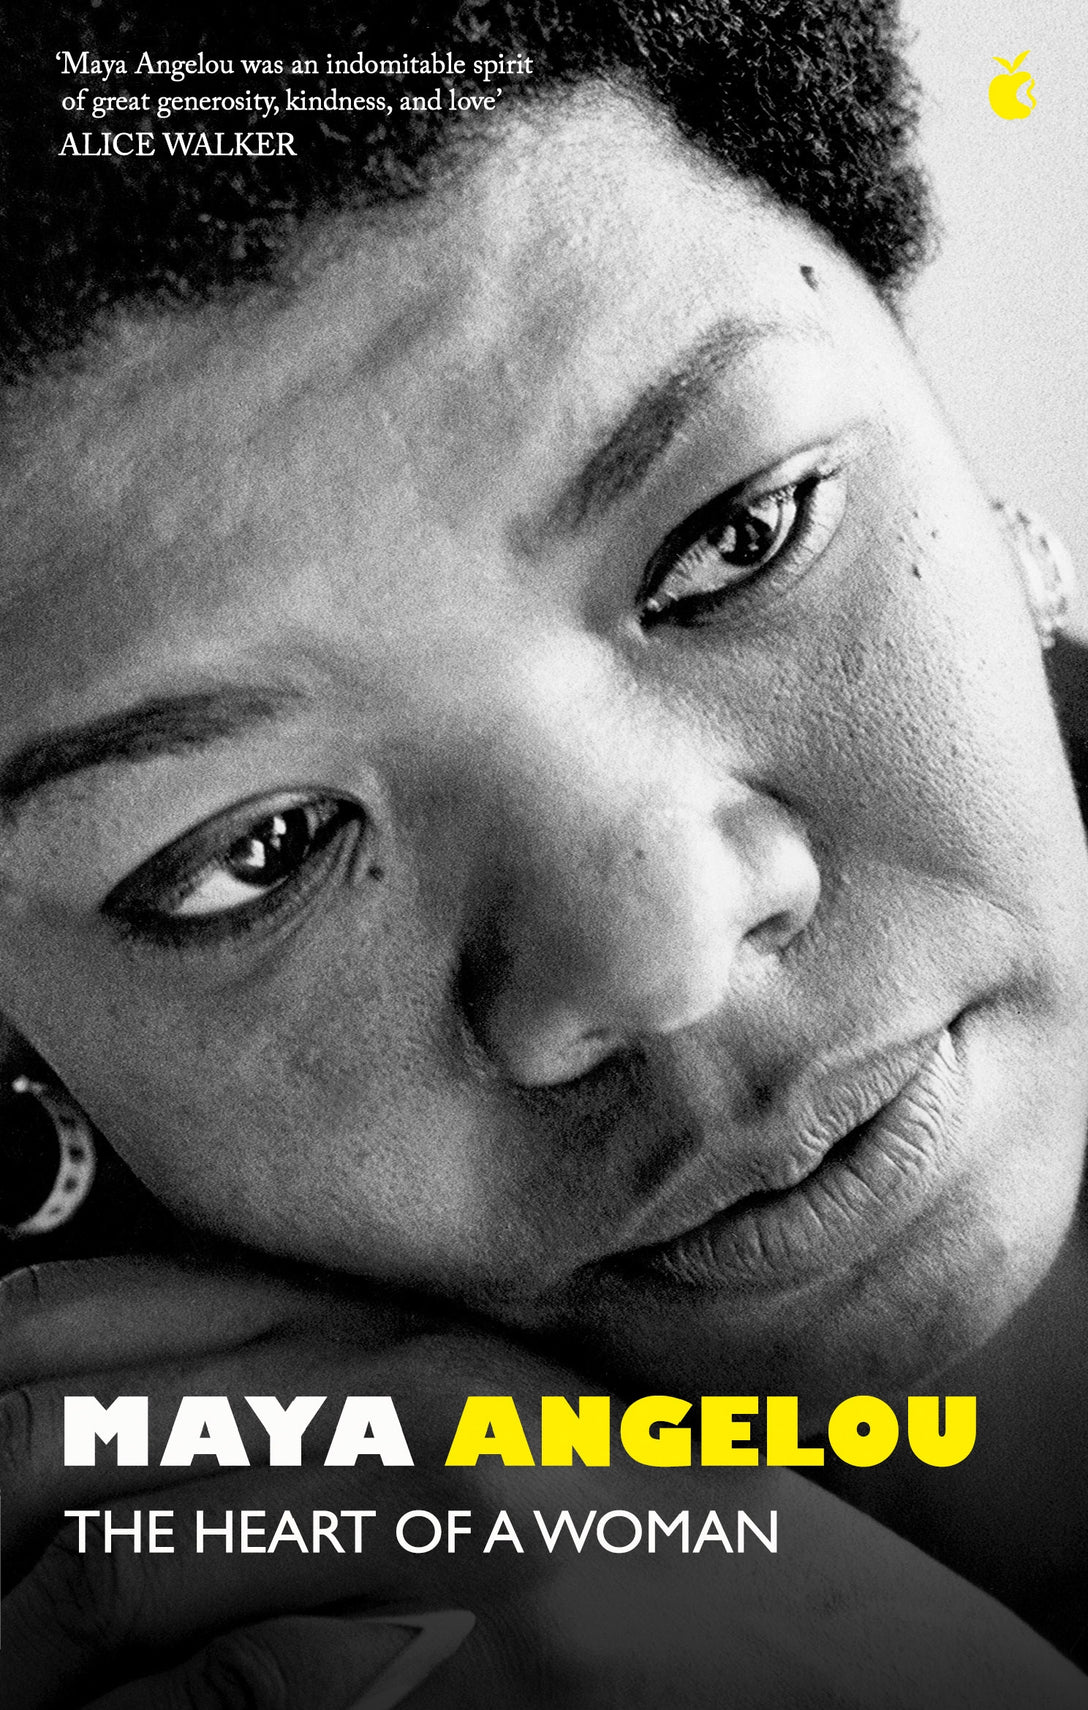 The Heart Of A Woman by Maya Angelou